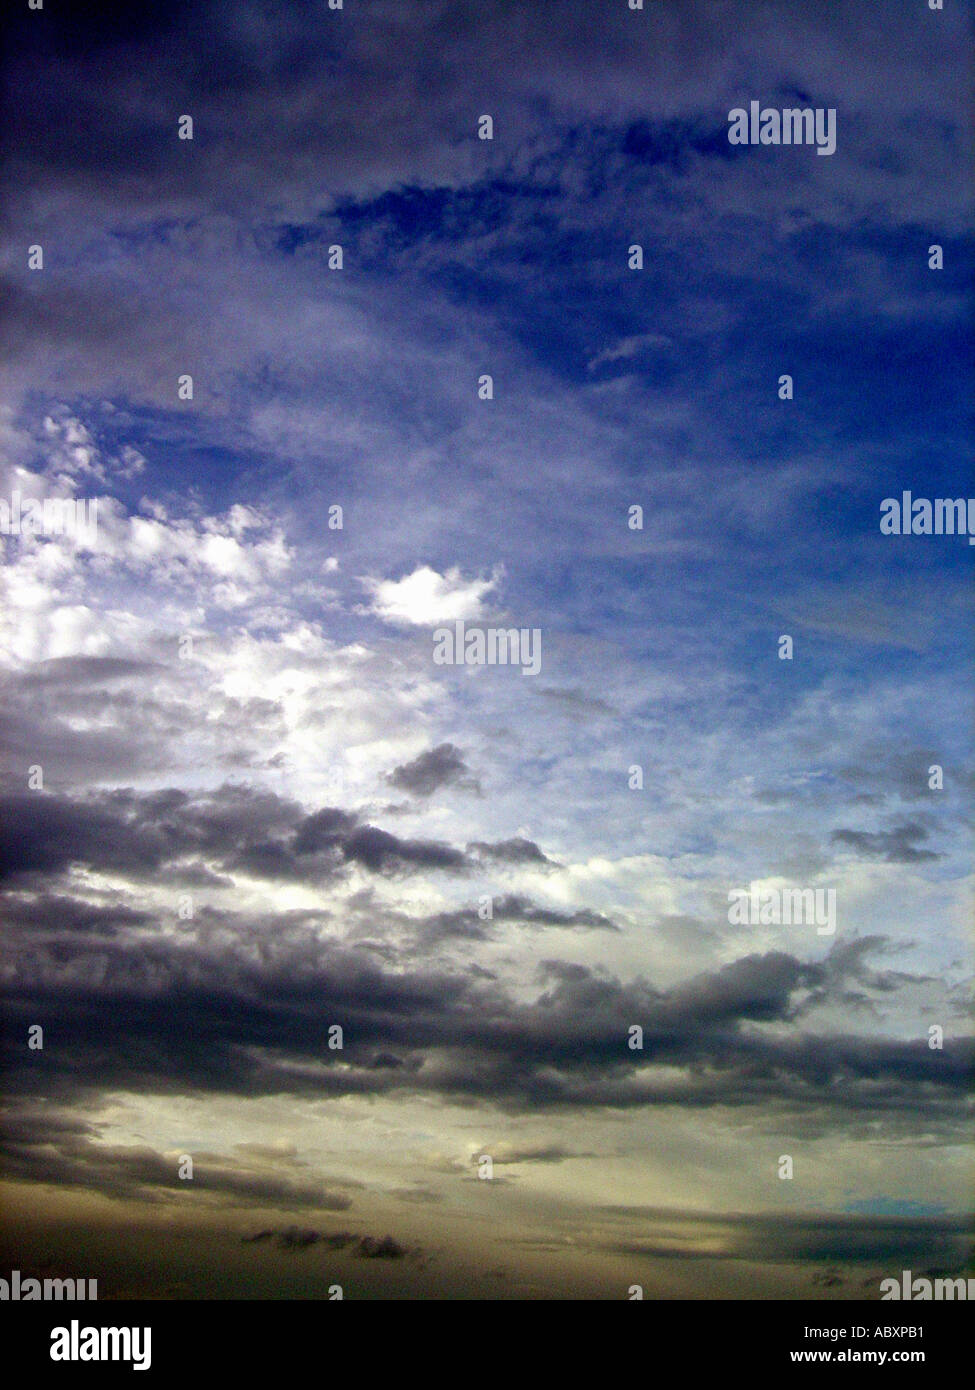 Rural Scene of Storm Clouds in The Sky Copy Space Stock Photo